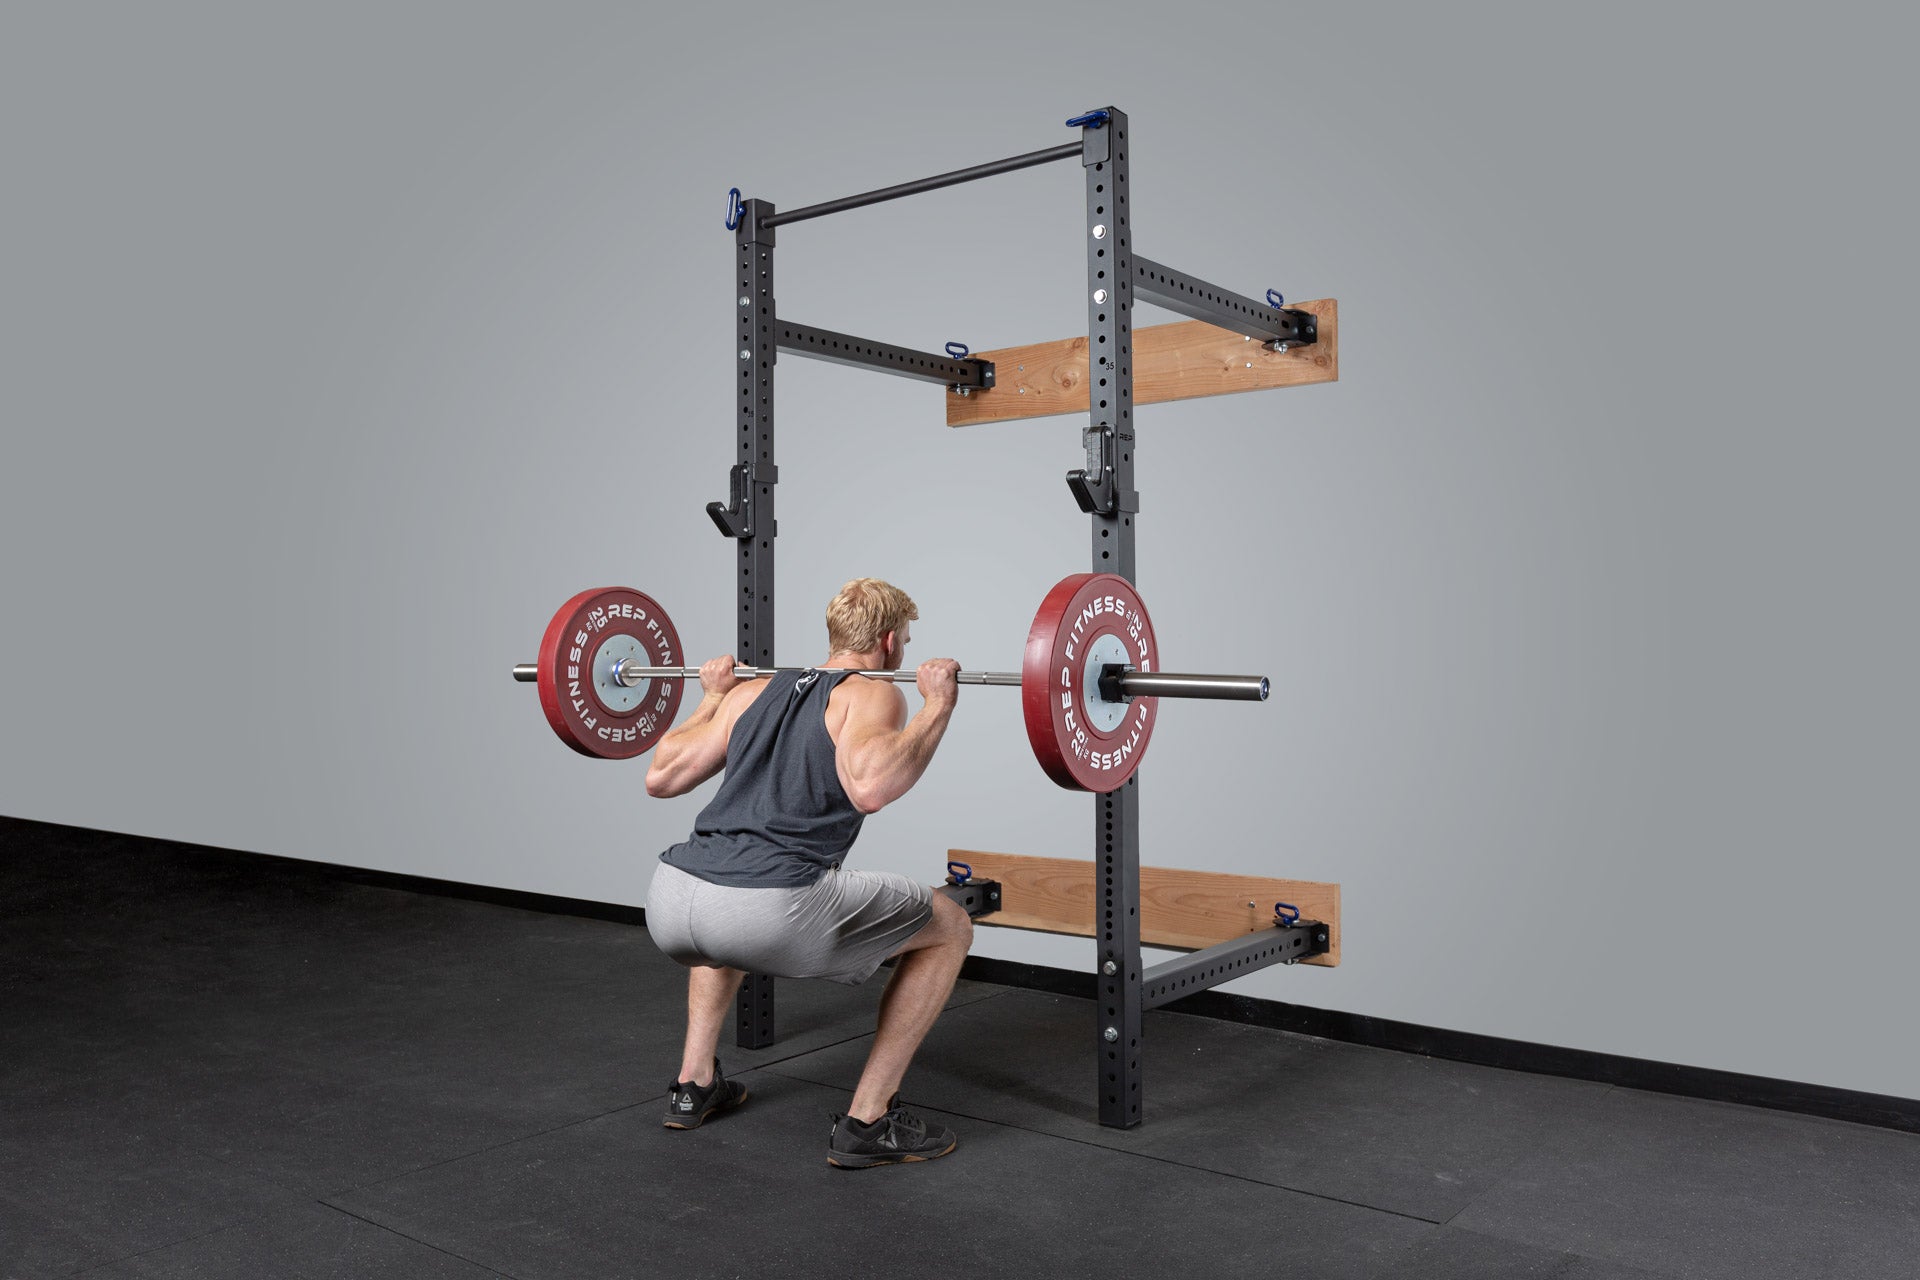 PR-4100 Folding Squat Rack In Use For Squats